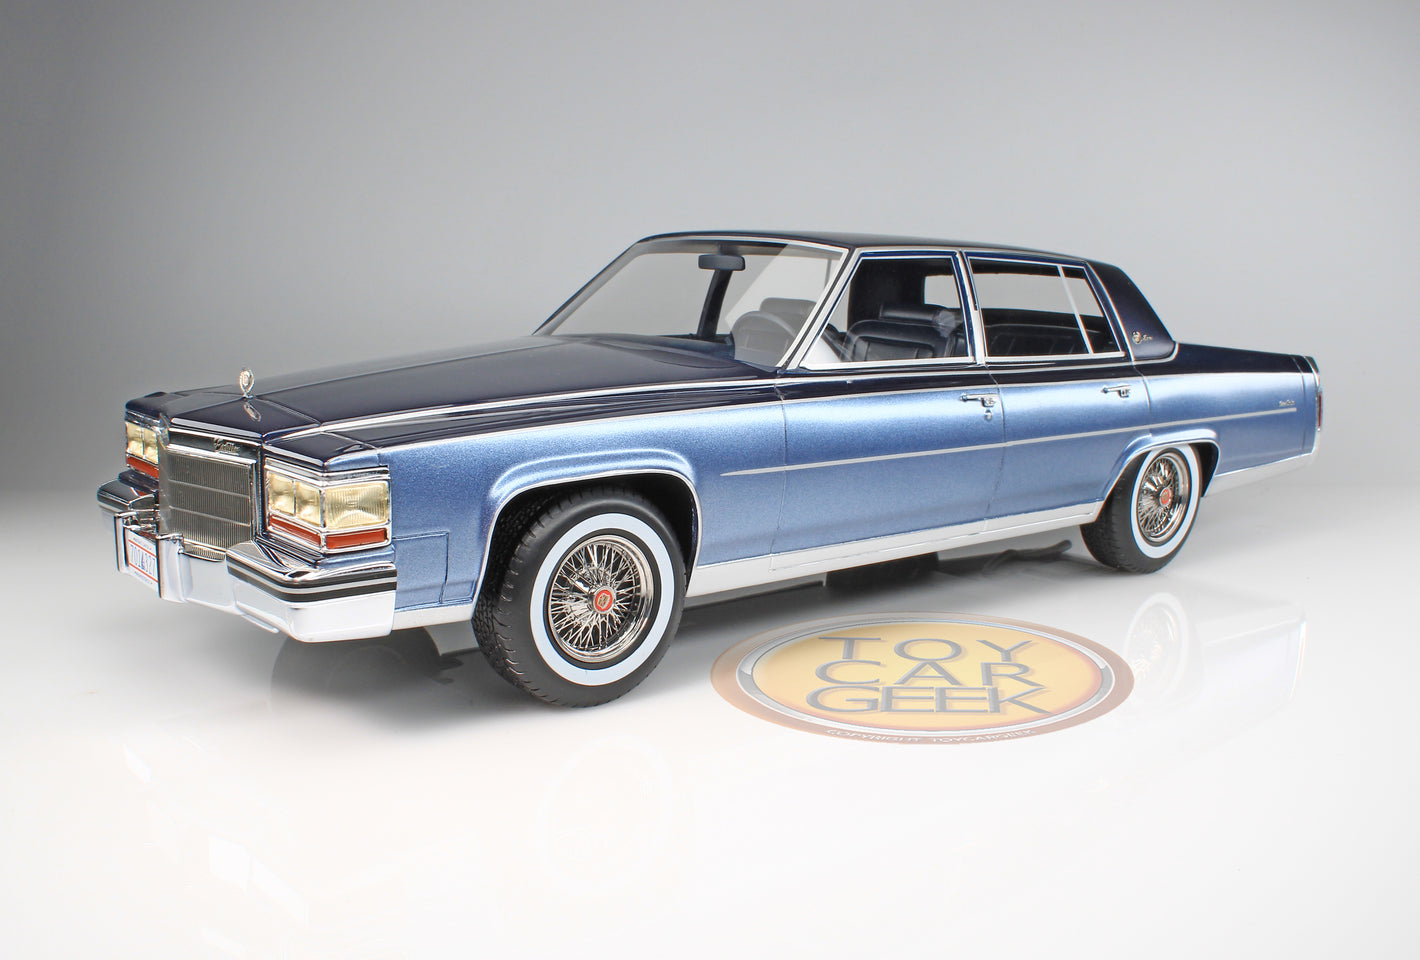 1982 Cadillac Fleetwood Brougham - Two-Tone Blue (Pre-Owned)